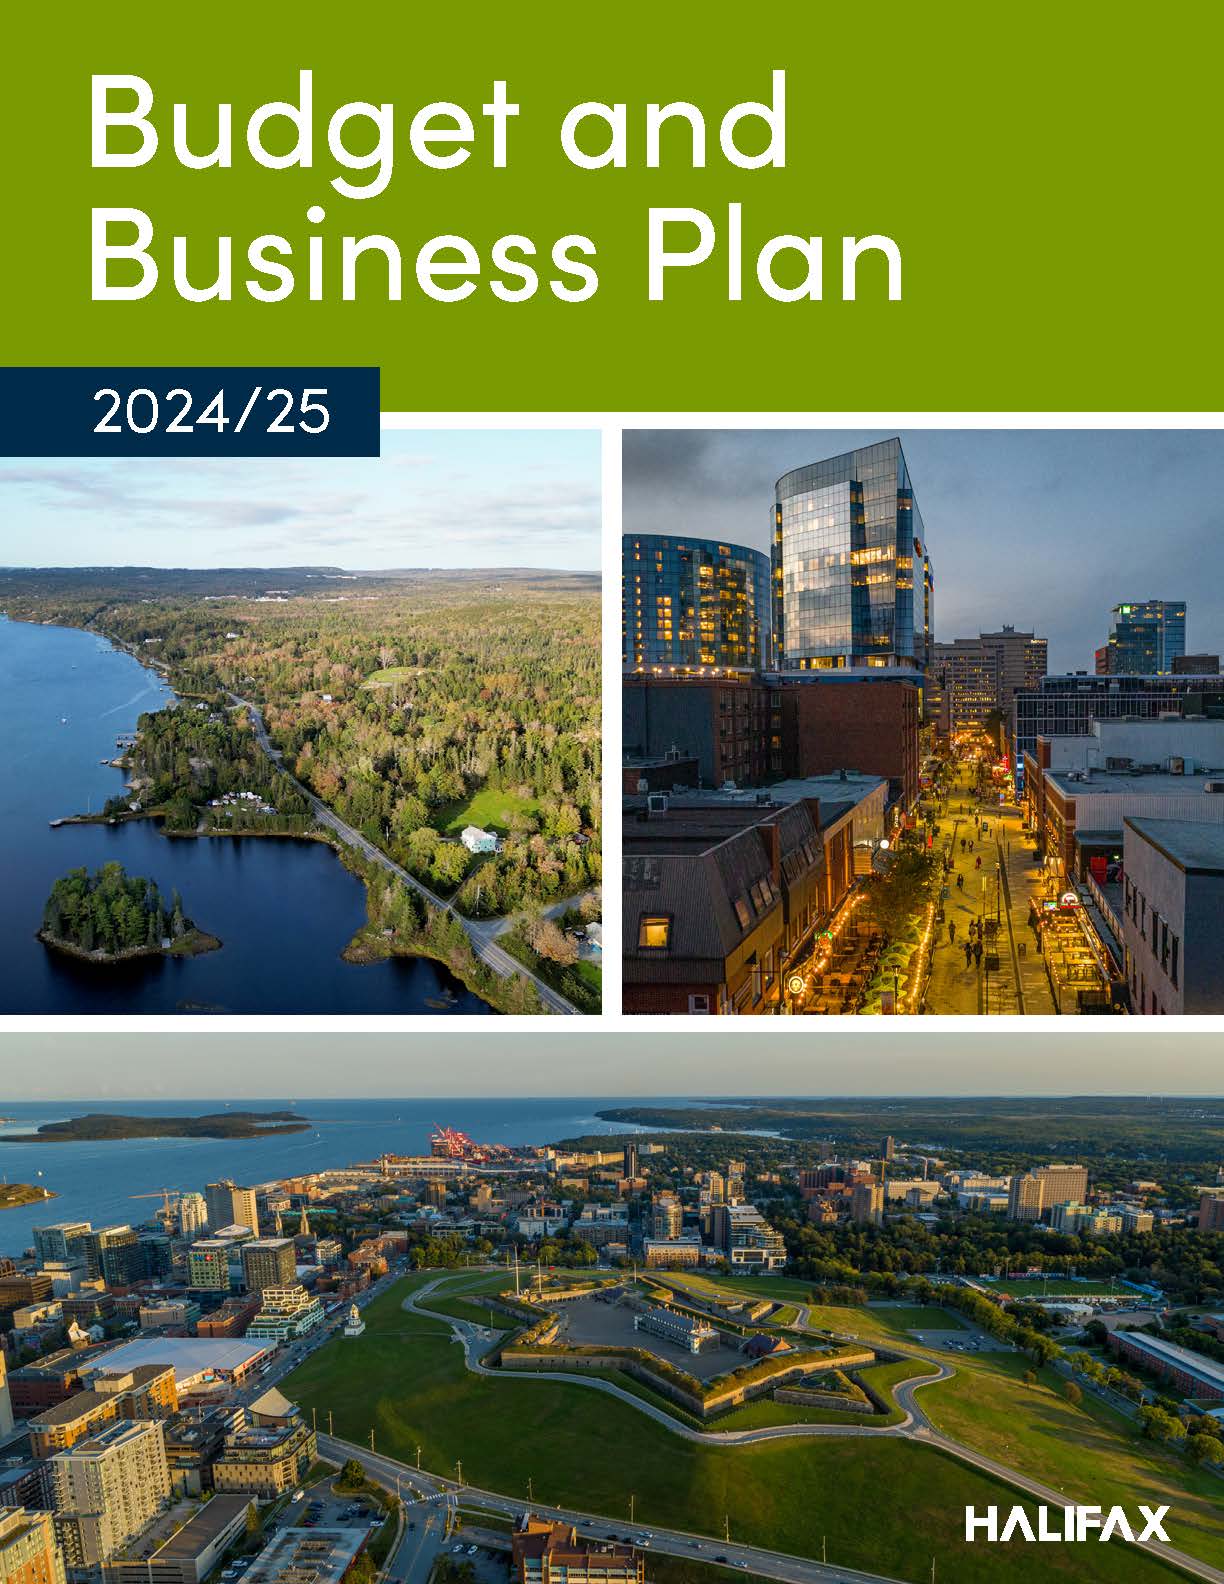 Budget and Business Plan 2024/25 with photos of landscapes and streetscapes throughout the municipality.